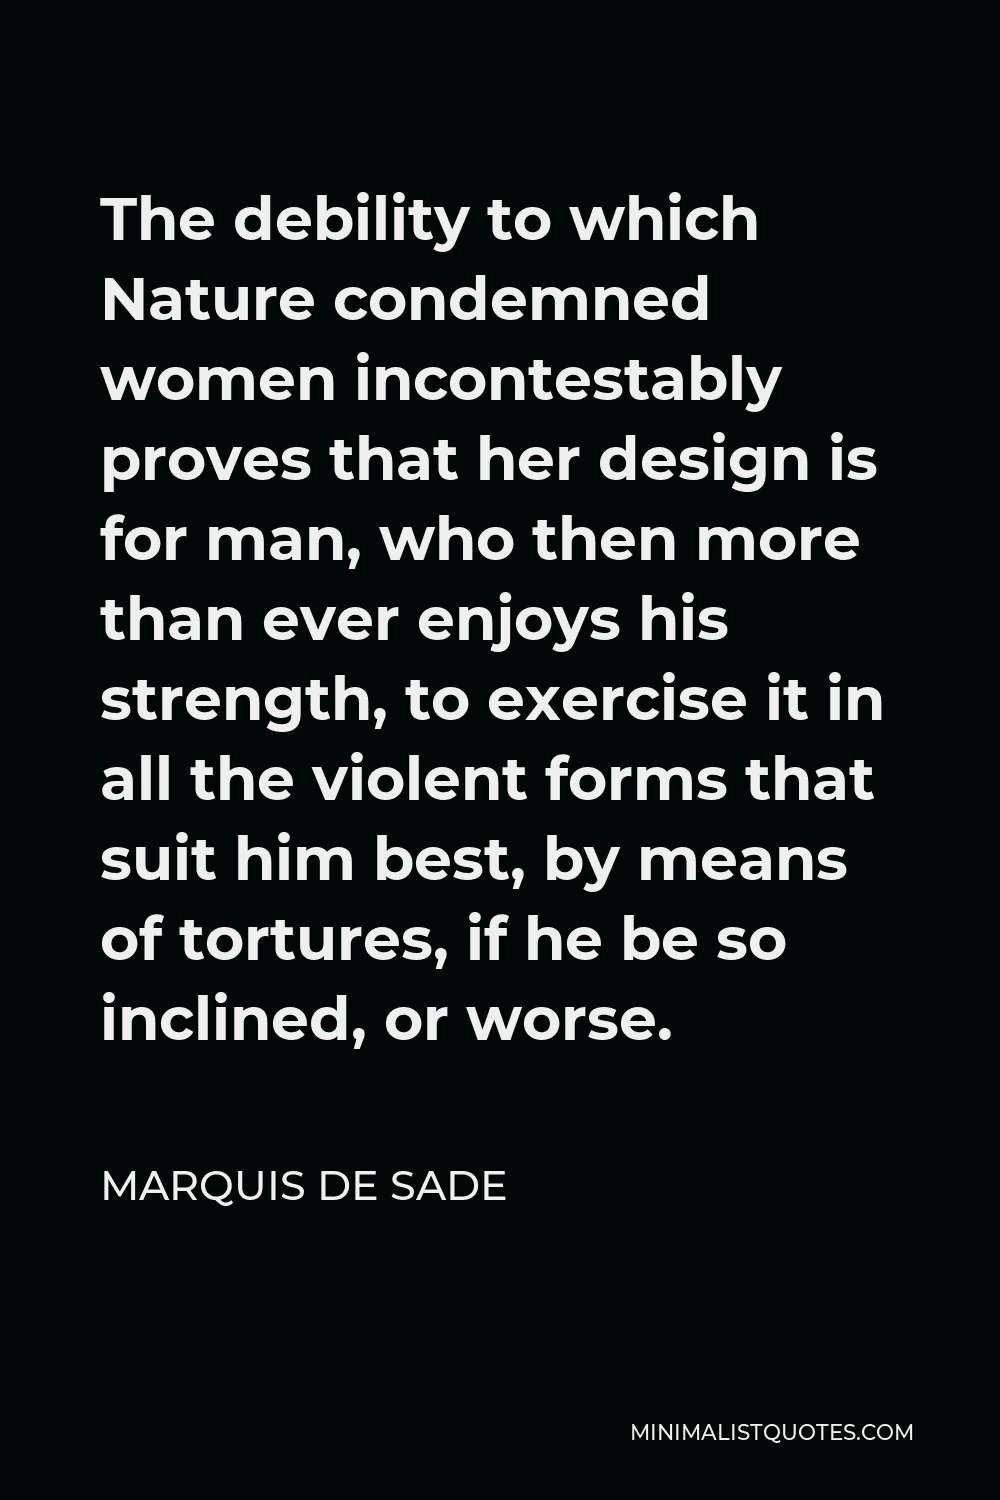 Marquis de Sade Quote - The debility to which Nature condemned women incontestably proves that her design is for man, who then more than ever enjoys his strength, to exercise it in all the violent forms that suit him best, by means of tortures, if he be so inclined, or worse.